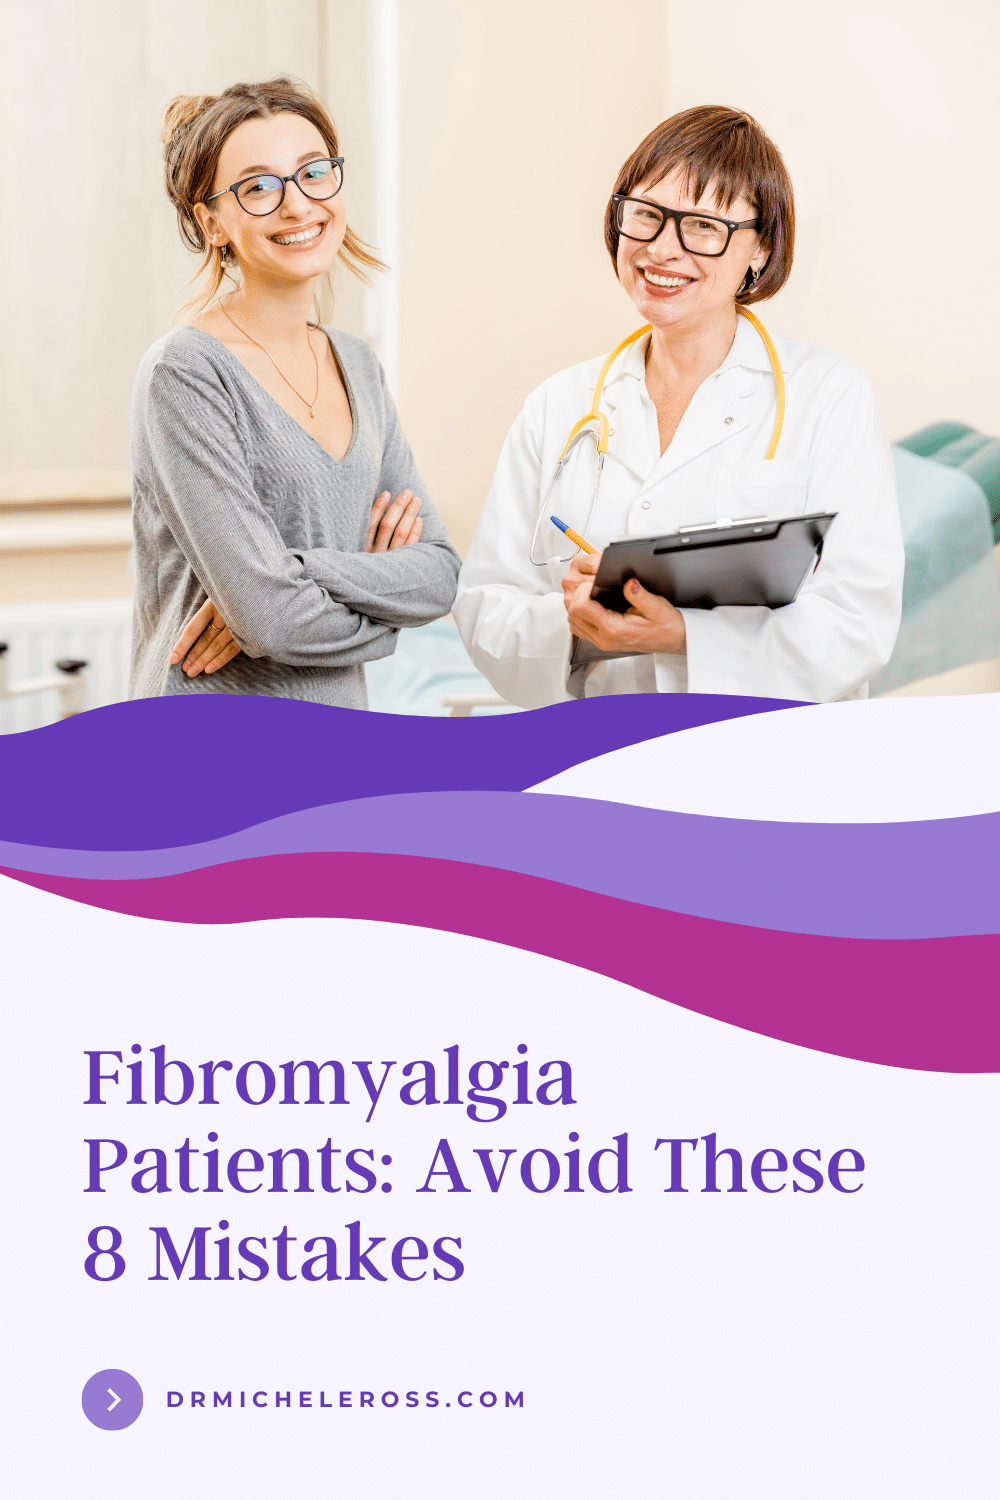 Attention Fibromyalgia Patients: Avoid These 8 Mistakes